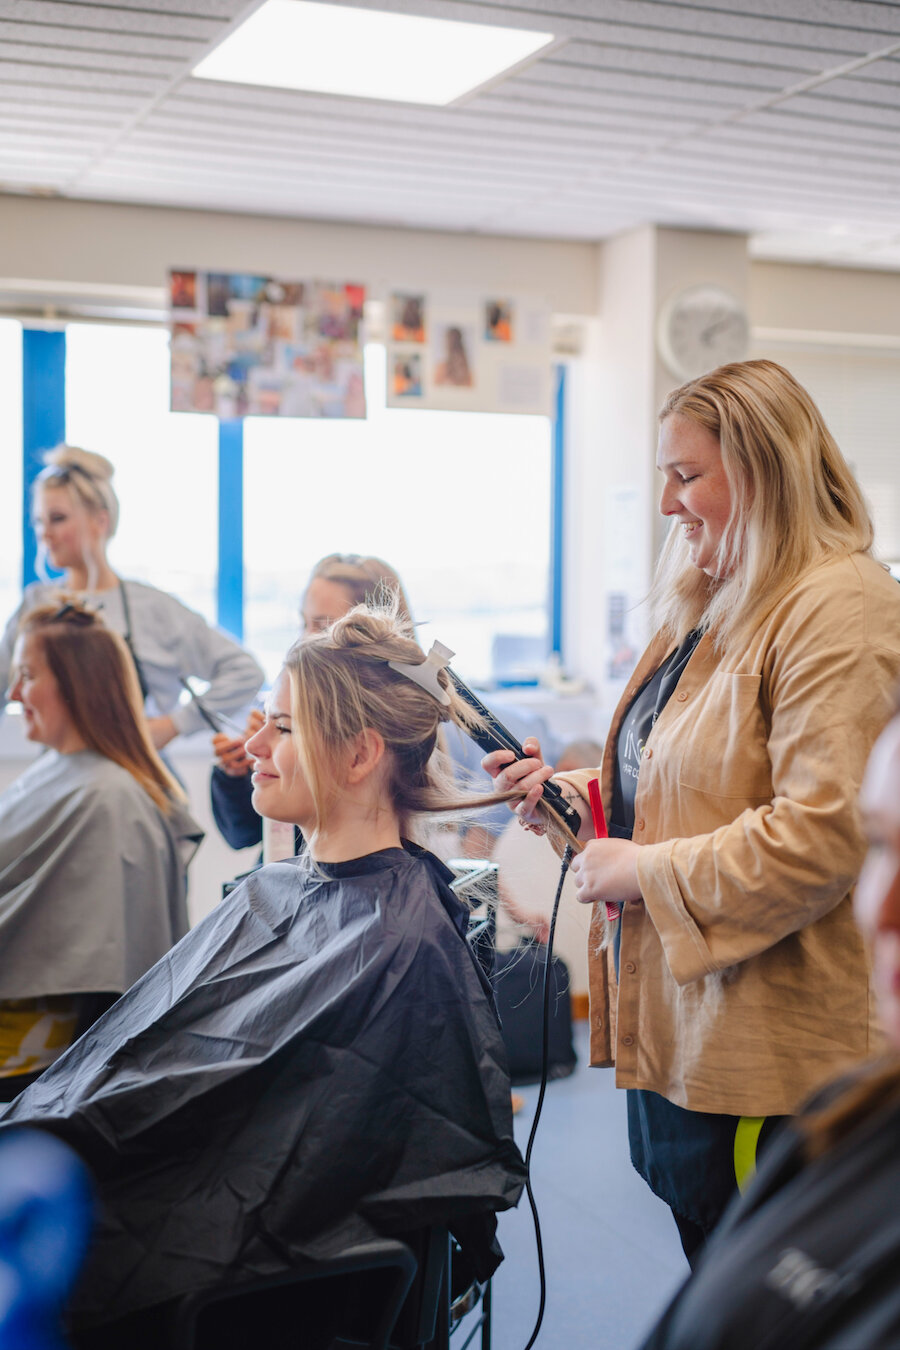 Lauren welcomes the opportunity to learn new hairdressing skills